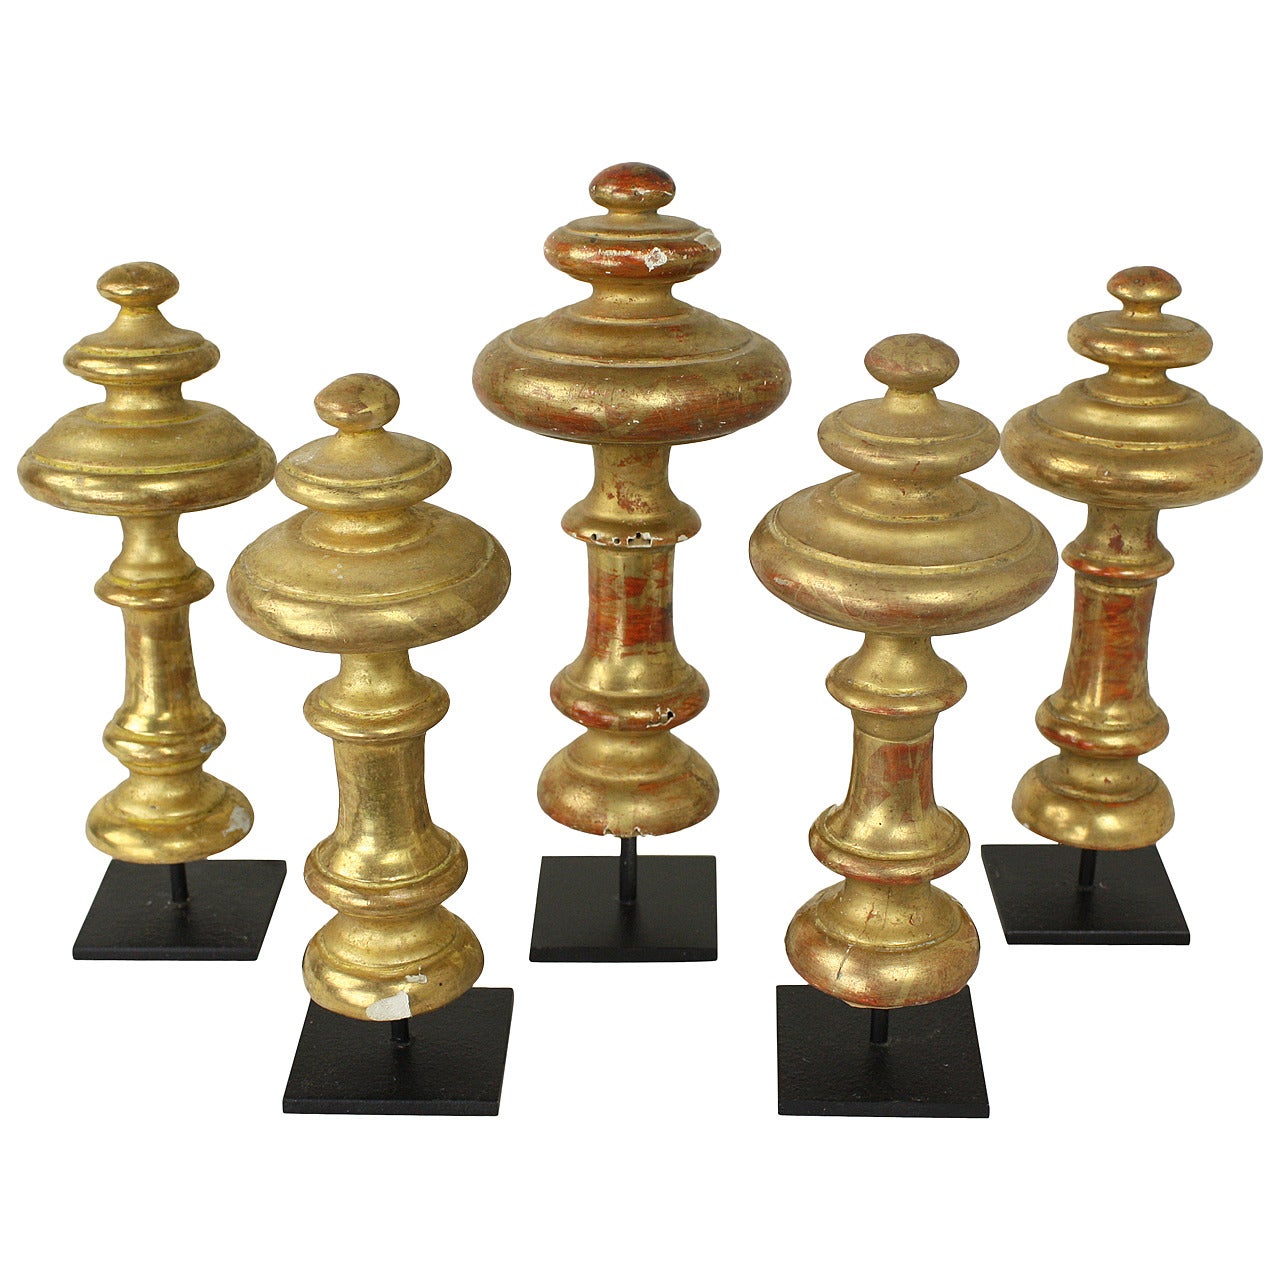 Five Antique Gilded French Finials